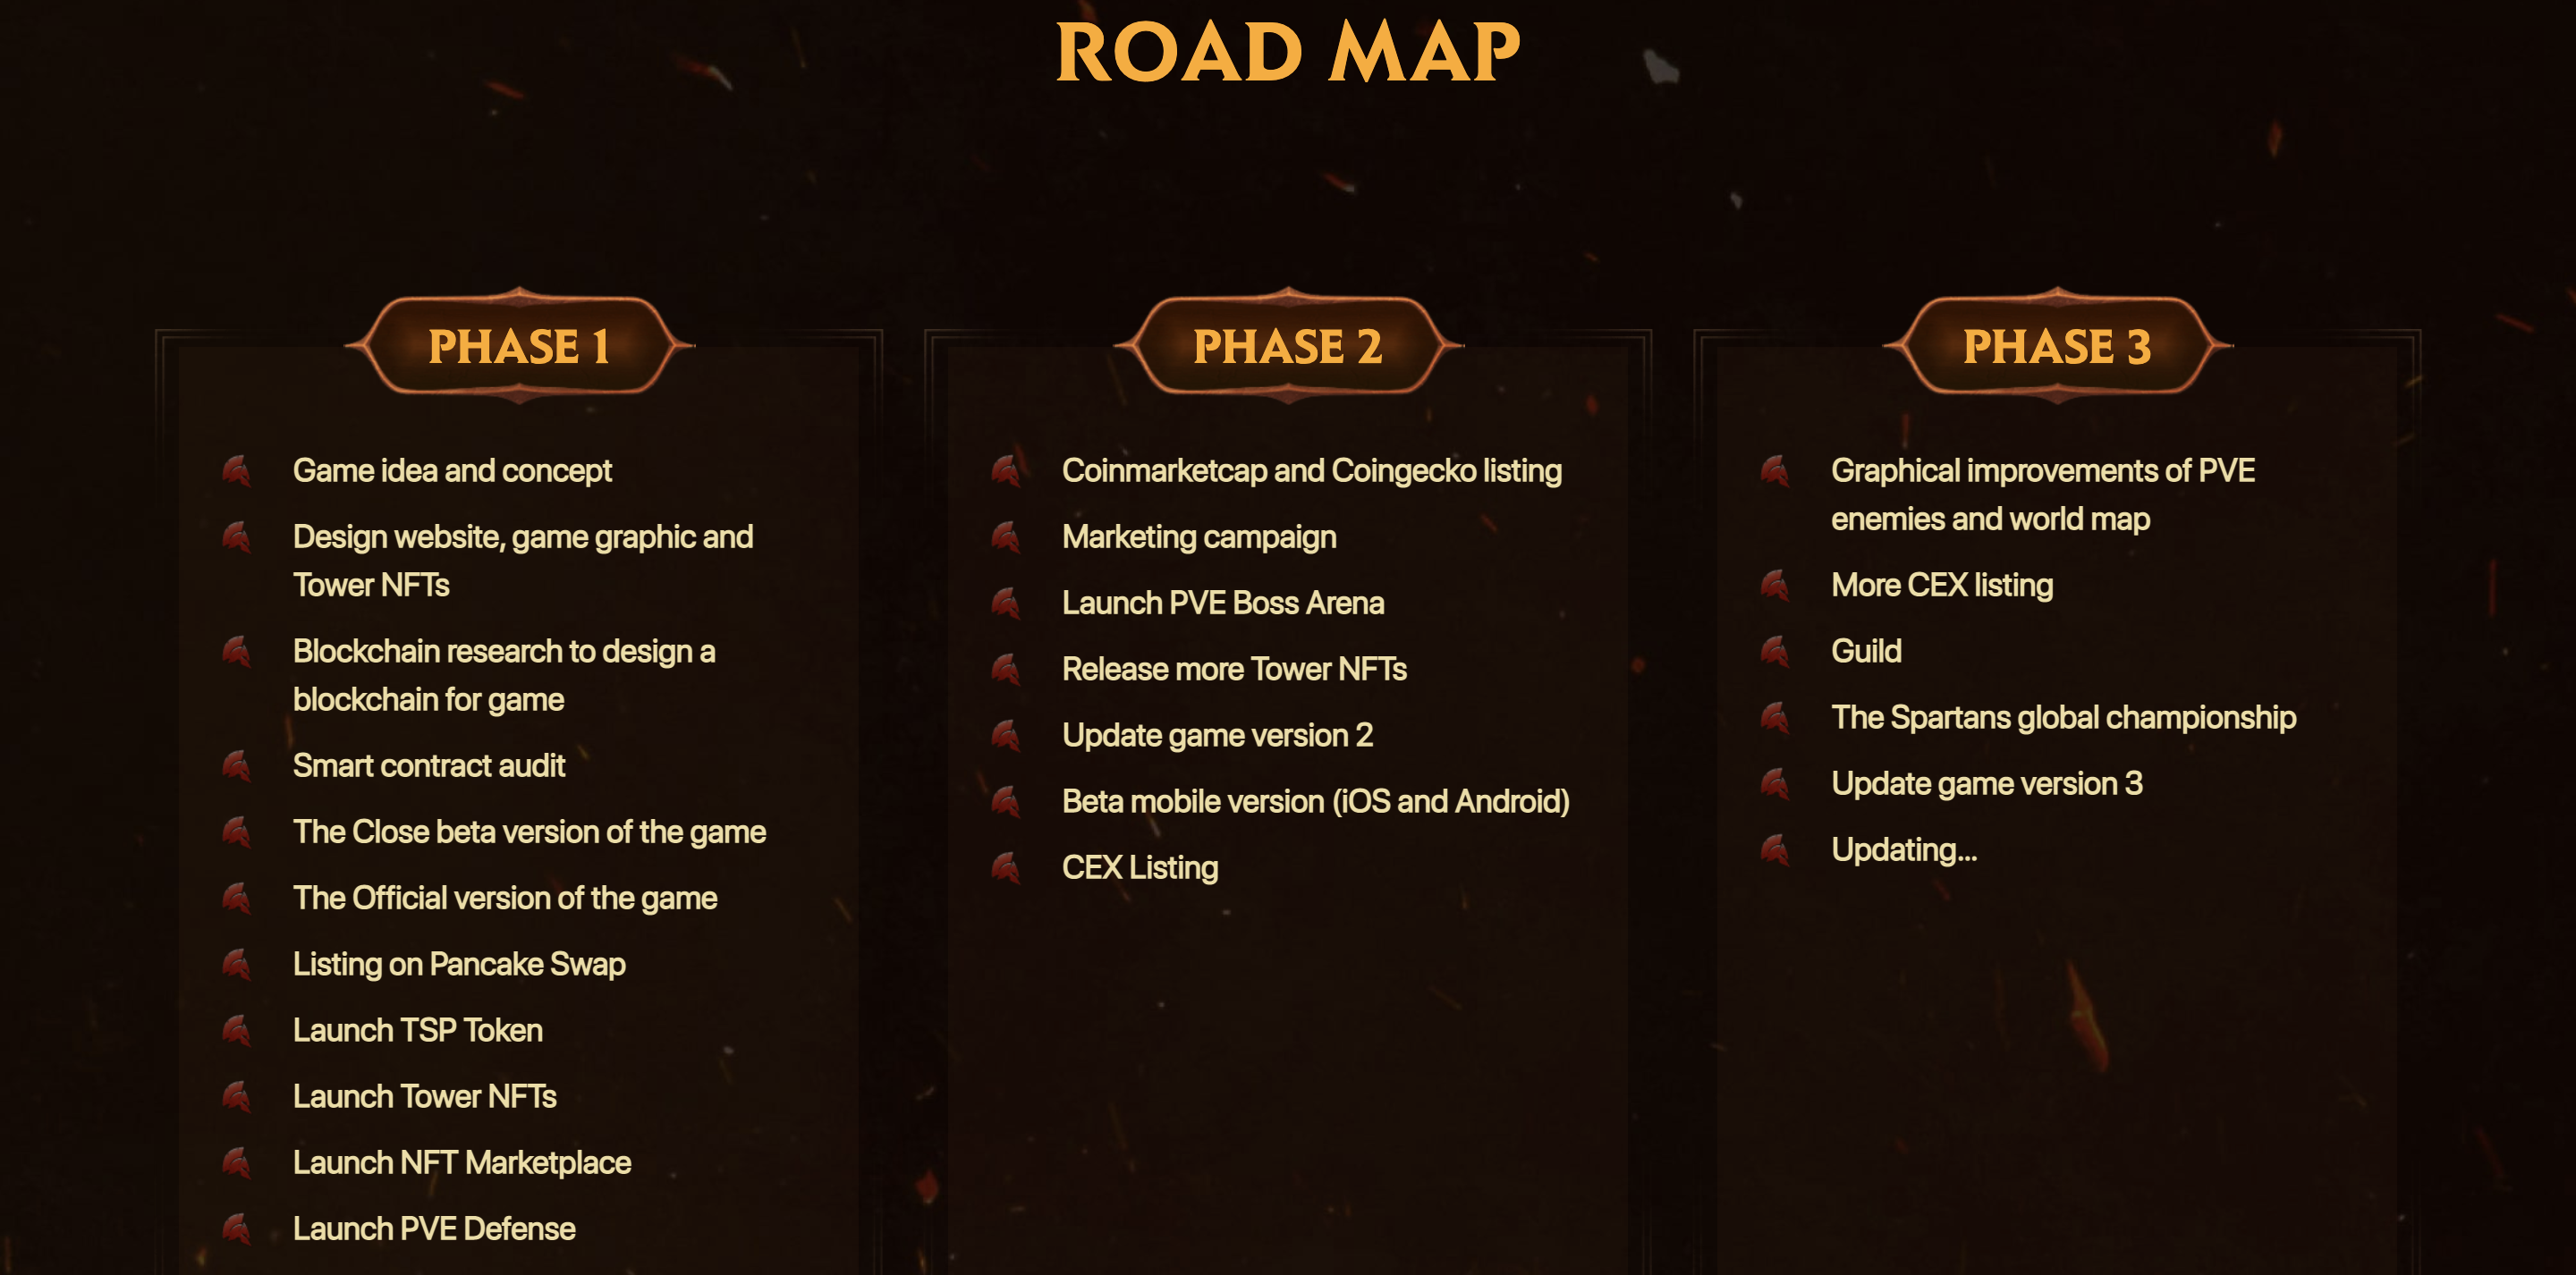 The Spartans Roadmap